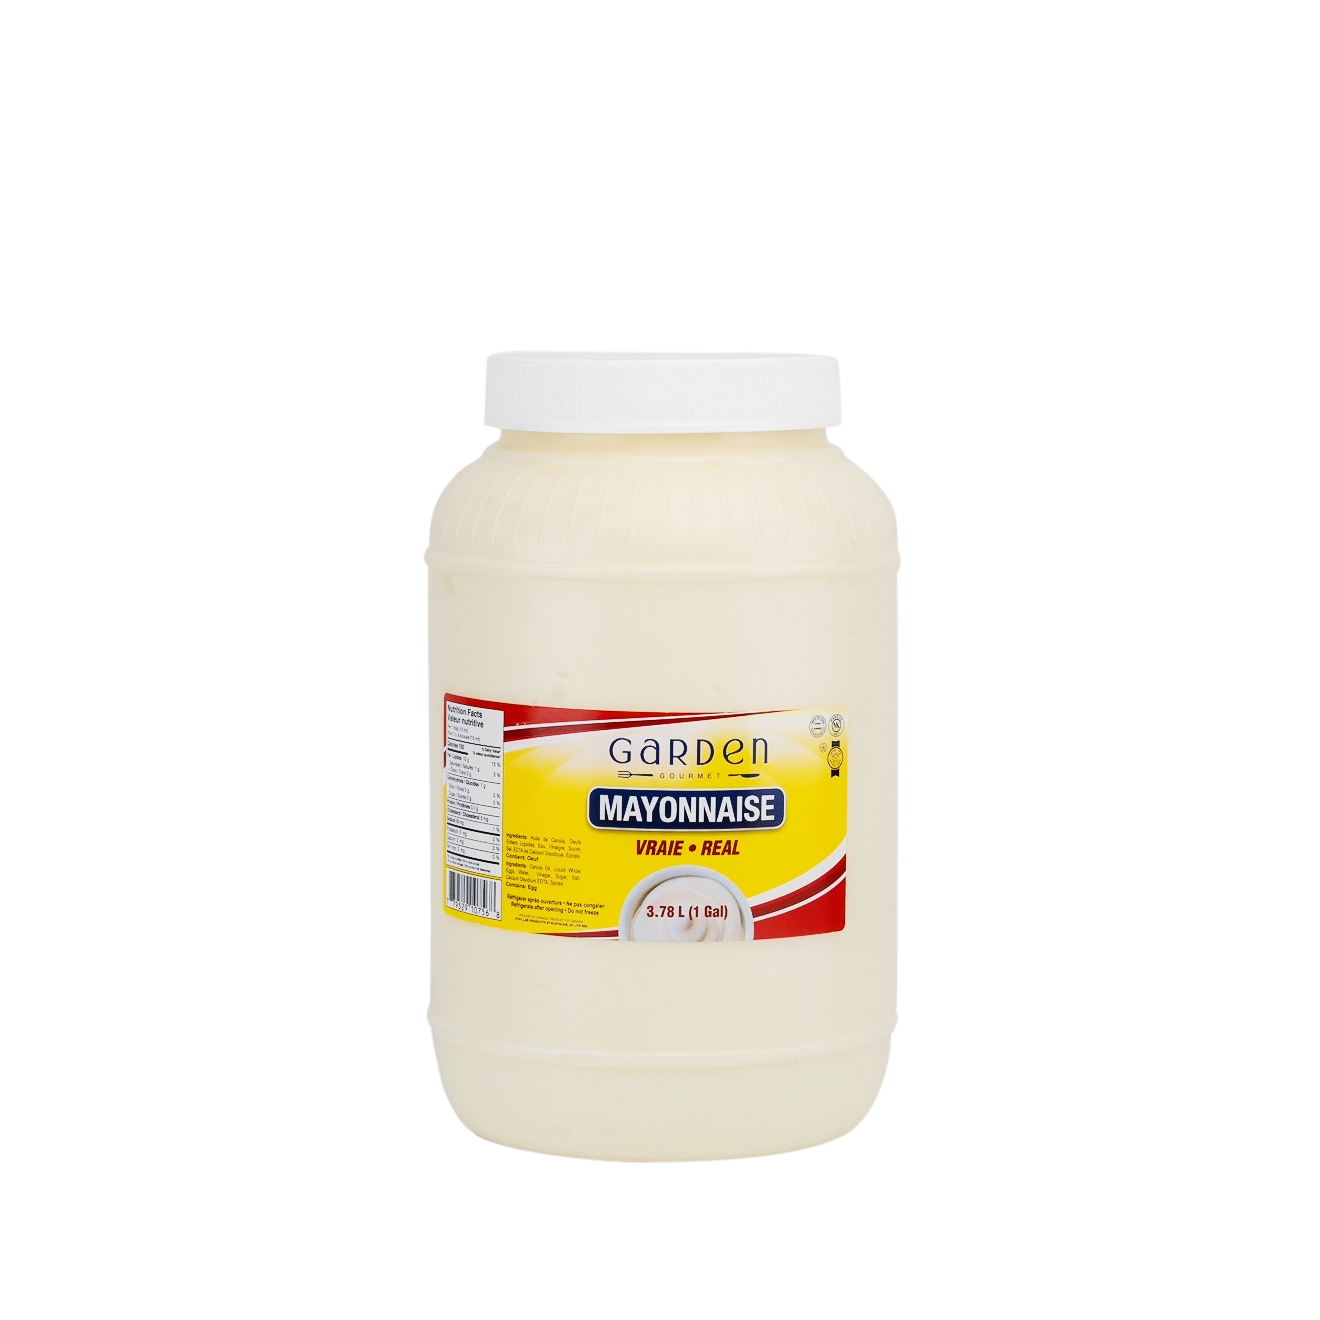 Garden Mayonnaise Vraie Real 3.78L